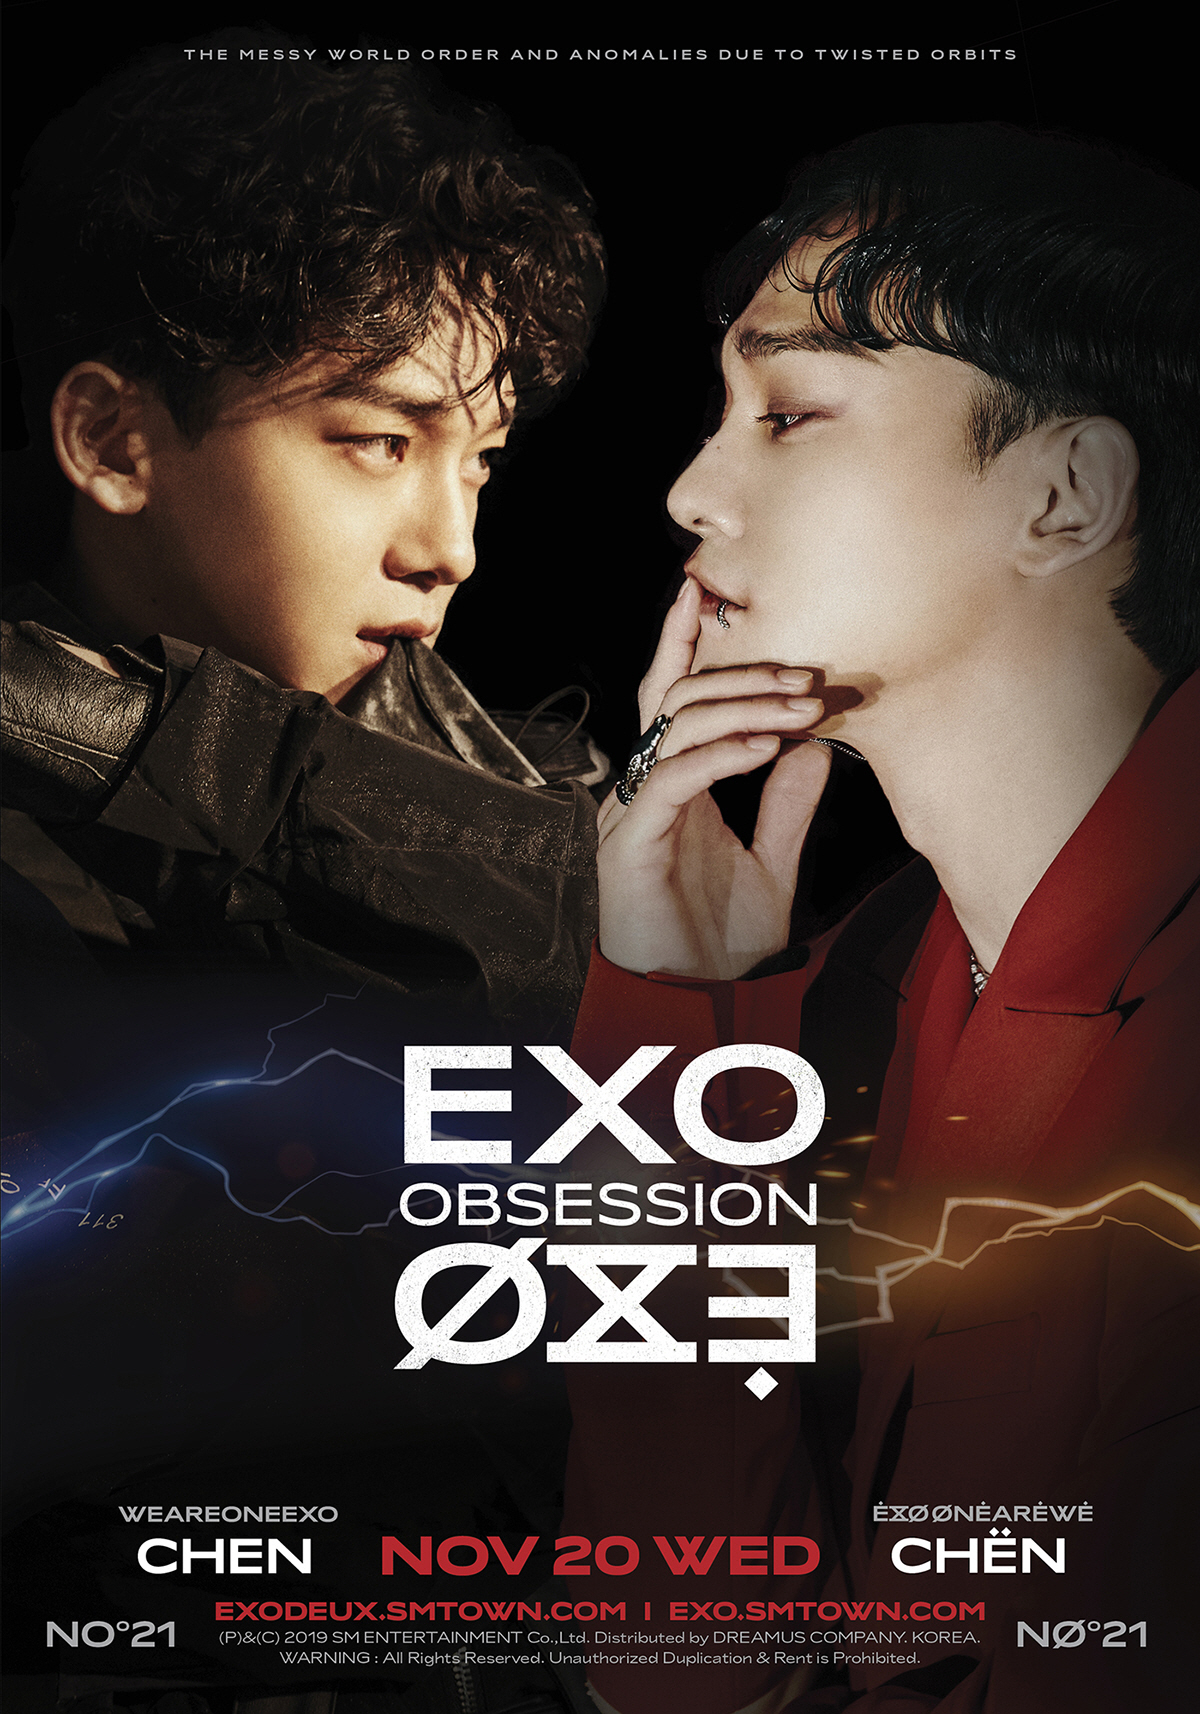 K-POP King EXO (a member of SM Entertainment) plays various charm music with songs Dance (Groove) and Ya Ya (Ya Ya Ya Ya Ya Ya) in Regular 6th album.EXO Regular 6th album OBSESSION (Obsession) will be released at 6 pm on the 27th at various music sites such as Melon, Flo, Genie, iTunes, Apple Music, Sporty Pie, QQ Music, Cougu Music, Cougar Music, Couwar Music, and will be released in Korean and Chinese versions of the title song Obsession It contains a total of 10 songs.The song Dance (Groove) is a dreamy dance song in which rhythmic chorus, string, and flute sound are harmonized. It depicts a lover sharing a sad feeling as if she crossed reality and dreams through Dance, and Ya Ya sampled Youre The One (You A The One) by female R&B vocal trio SWV It is a hip-hop dance song reinterpreted in the EXO style. It is a weighty 808 bass, an addictive chorus, and a lyrics that confidently express the belief in love that started for a moment.Also, today (20th) at 0:00 EXO and X-EXOs various SNS accounts, the release of the member Chens Teaser Image, the appearance of EXO Chen, who is impressed with the understated charisma, and X-EXO Chen, which emits an overwhelming atmosphere with cool eyes, amplifies the expectation of comeback.On the other hand, EXO Regular 6th album OBSESSION will be released on November 27th.